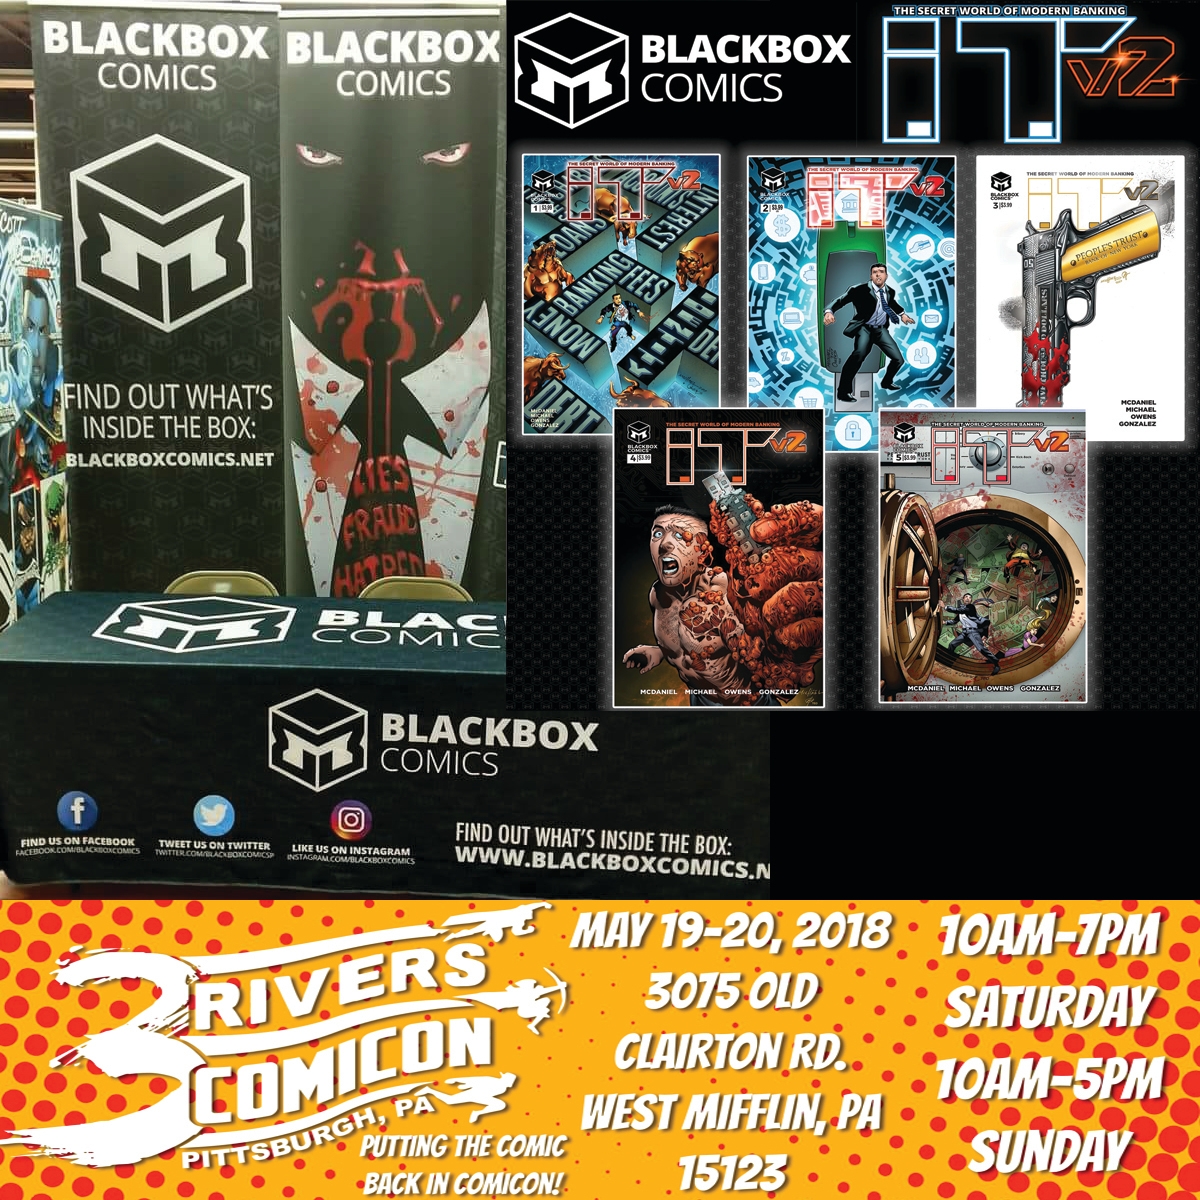 COMIC CON HIGHWAY NORTHERN EXIT::  -PA- Dimitrios and BlackBox Comic HEAD to 3 Rivers Comic Con  . May 19-20